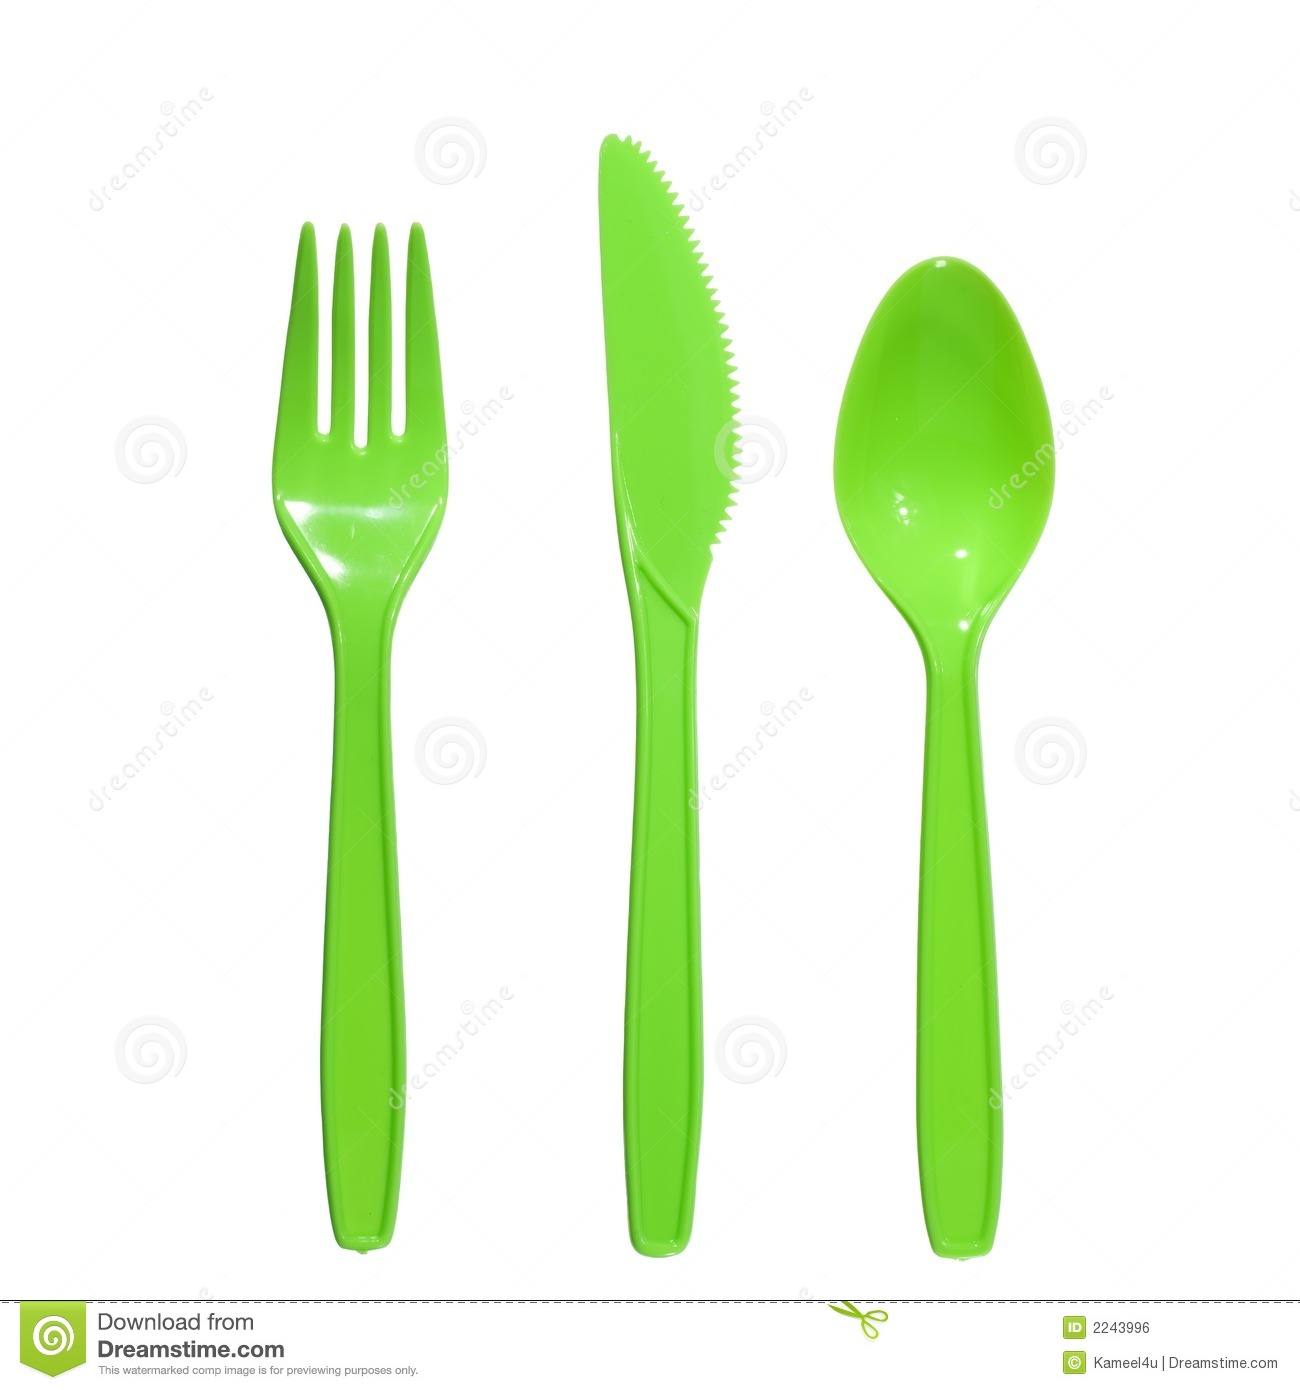 Plastic Fork Knife Spoon Royalty Free Stock Image   Image  2243996